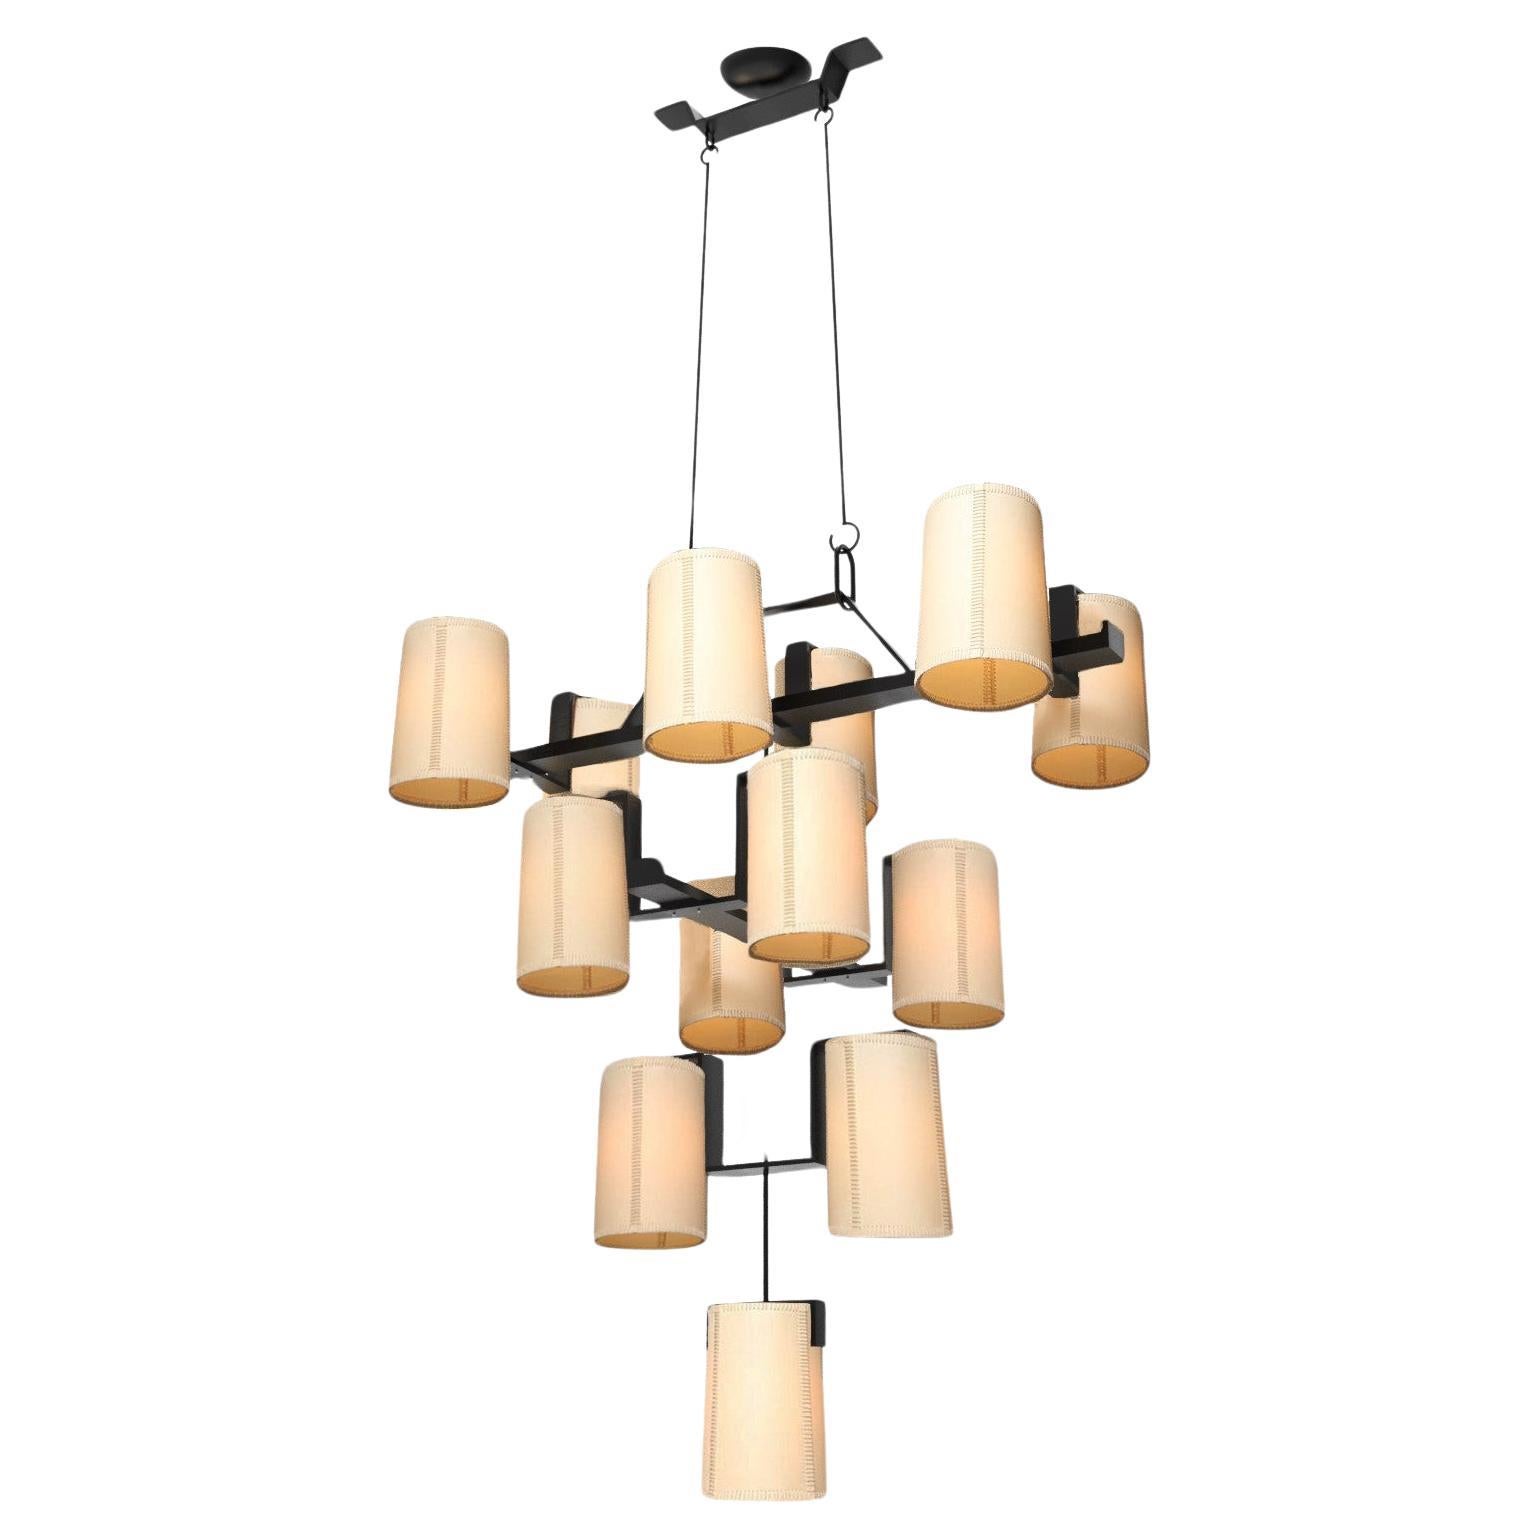 13-Light Forged Iron Chandelier